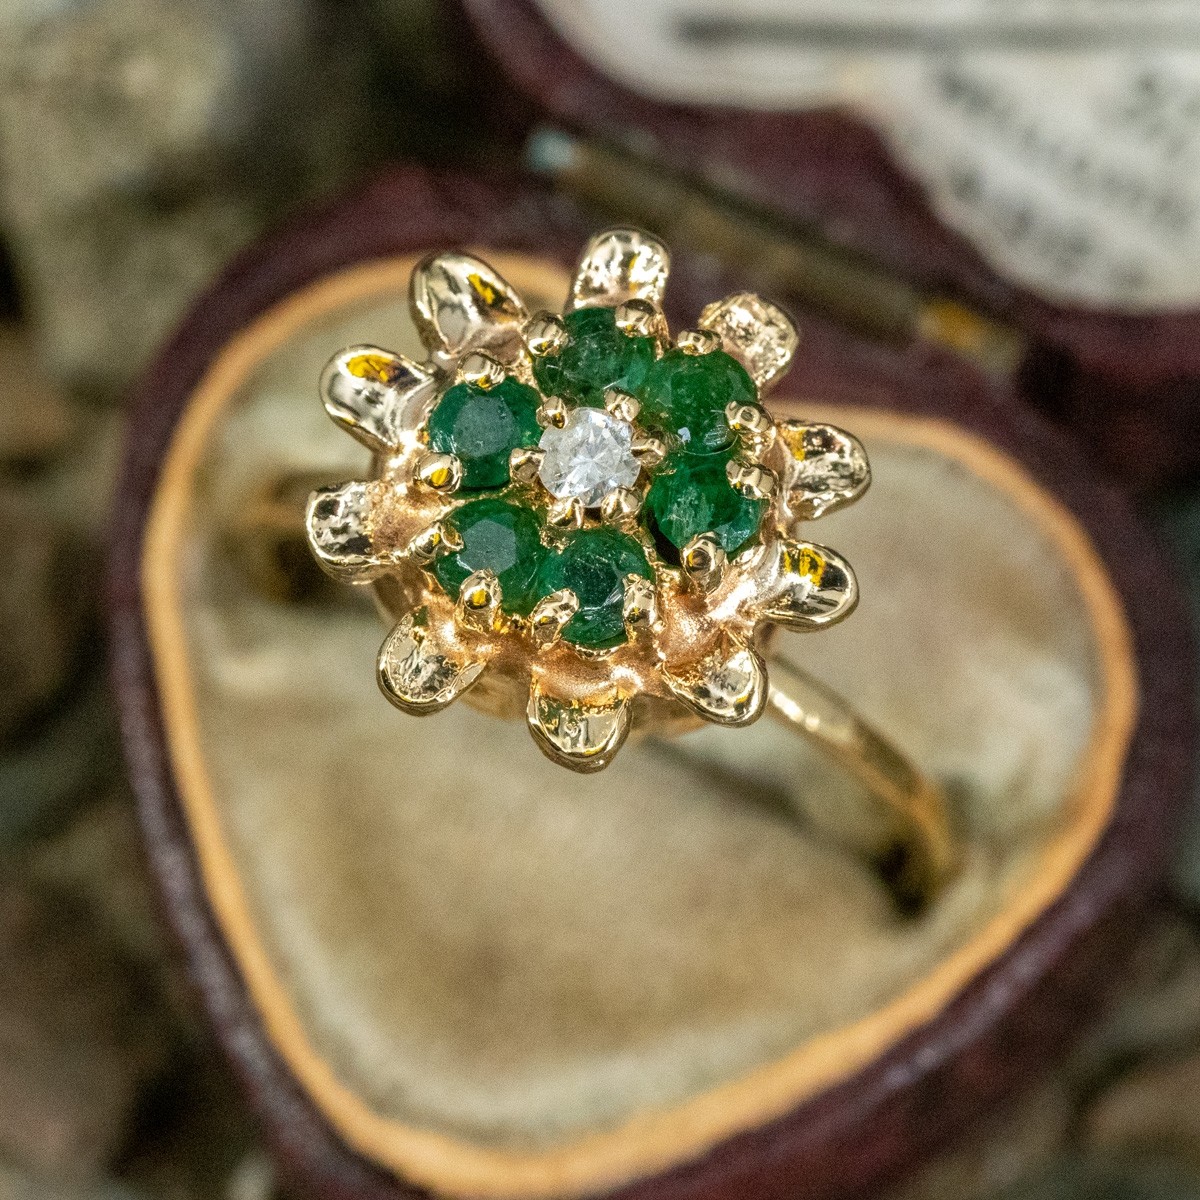 Jewel of the Week - Antique Emerald and Diamond Ring! | PriceScope